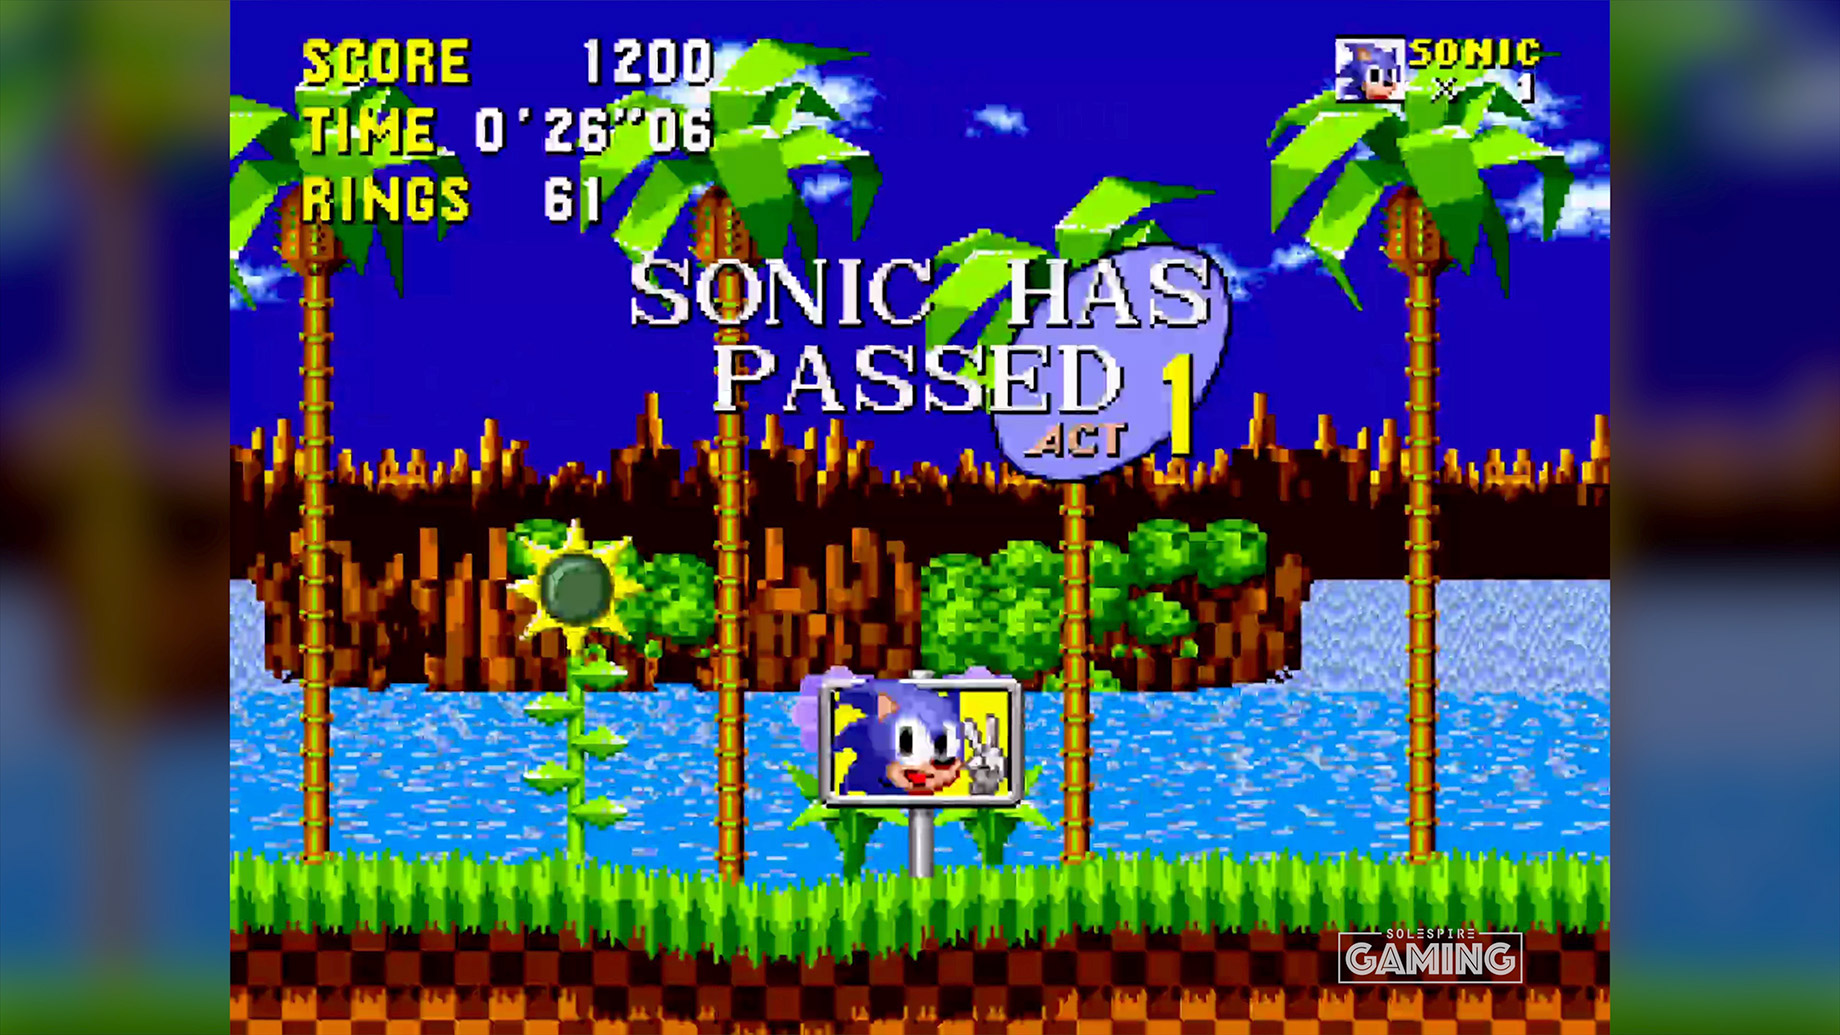 Sonic the Hedgehog - Green Hill Zone, Act 1 - Time Attack - 0:26.06 Speed Run - iPad Video